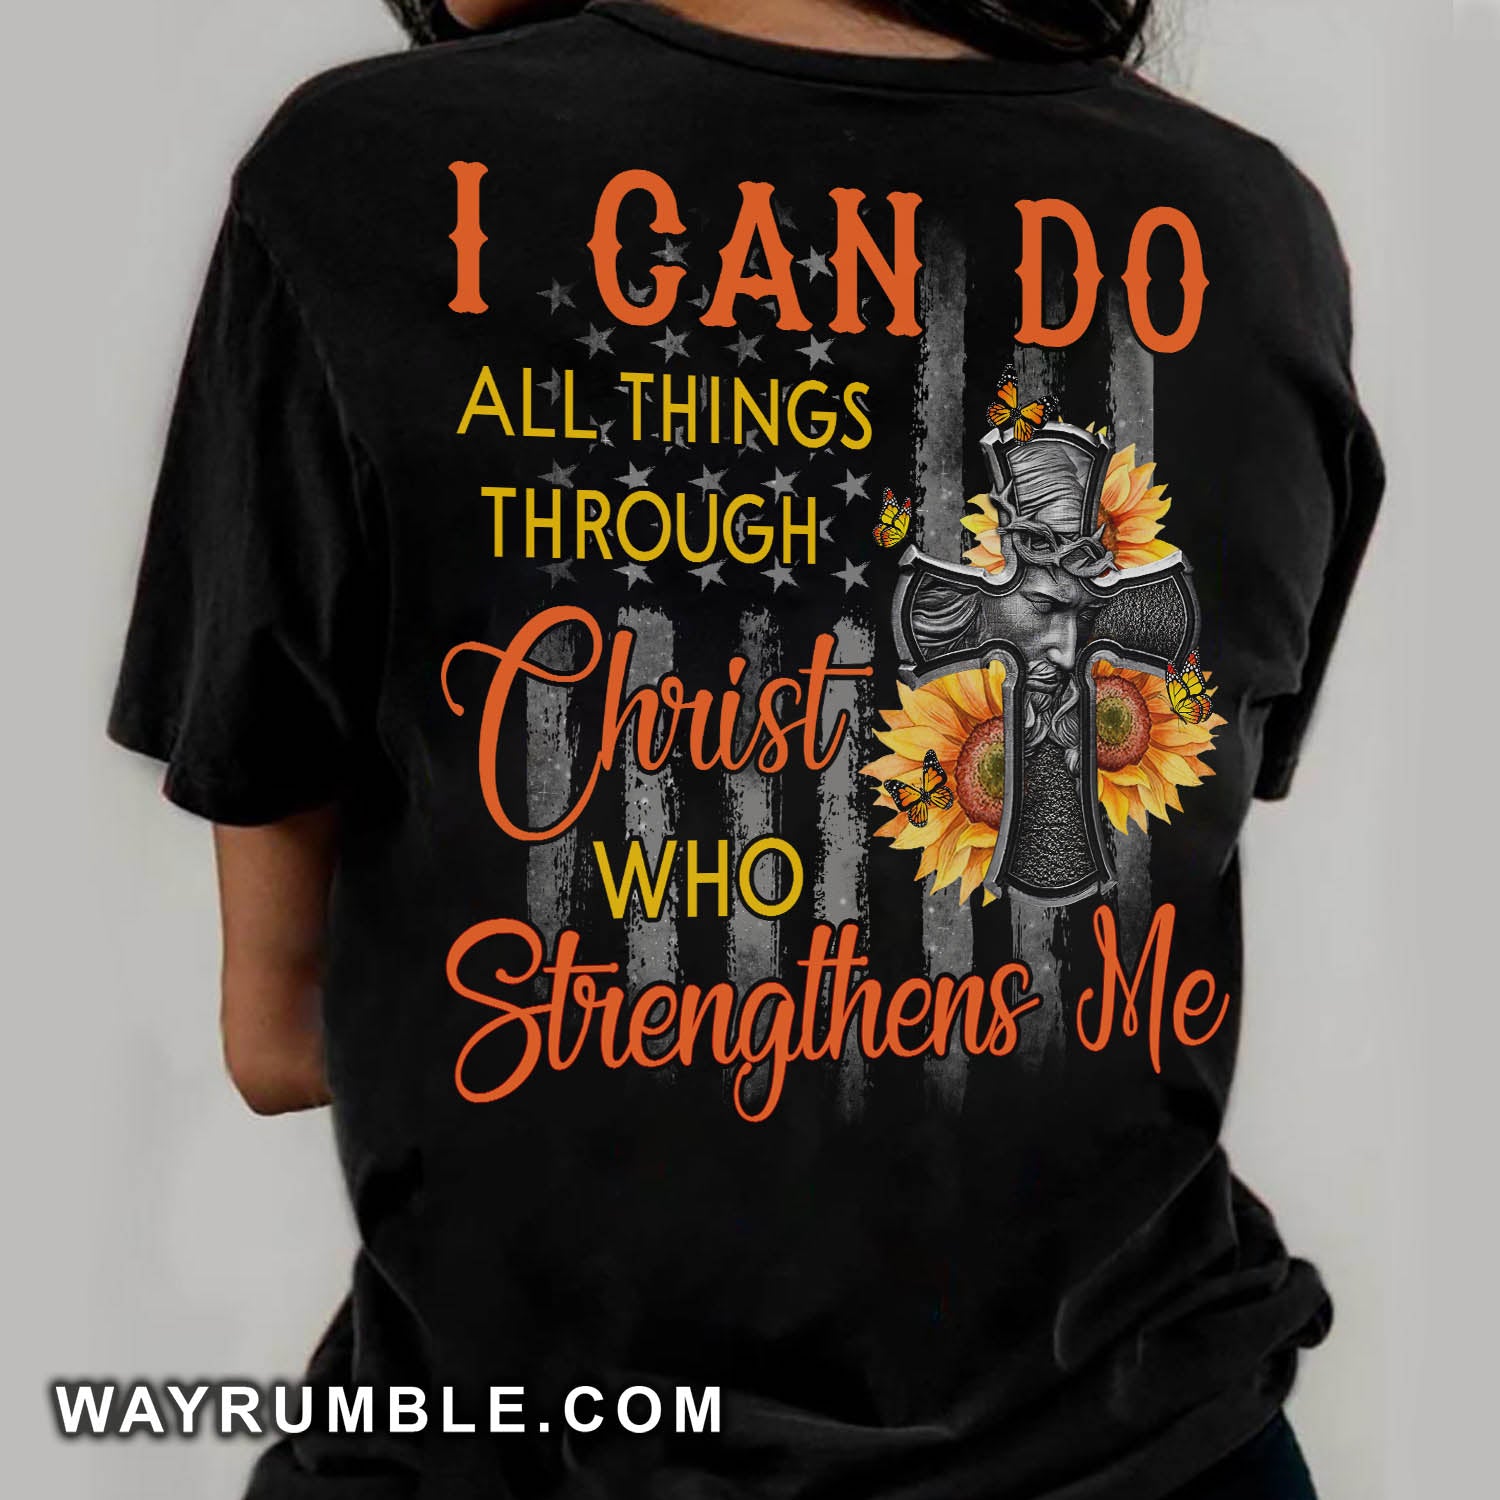 Amazing Cross, sunflower, US flag I can do all thing through Christ - Jesus Back-printed Black Apparel